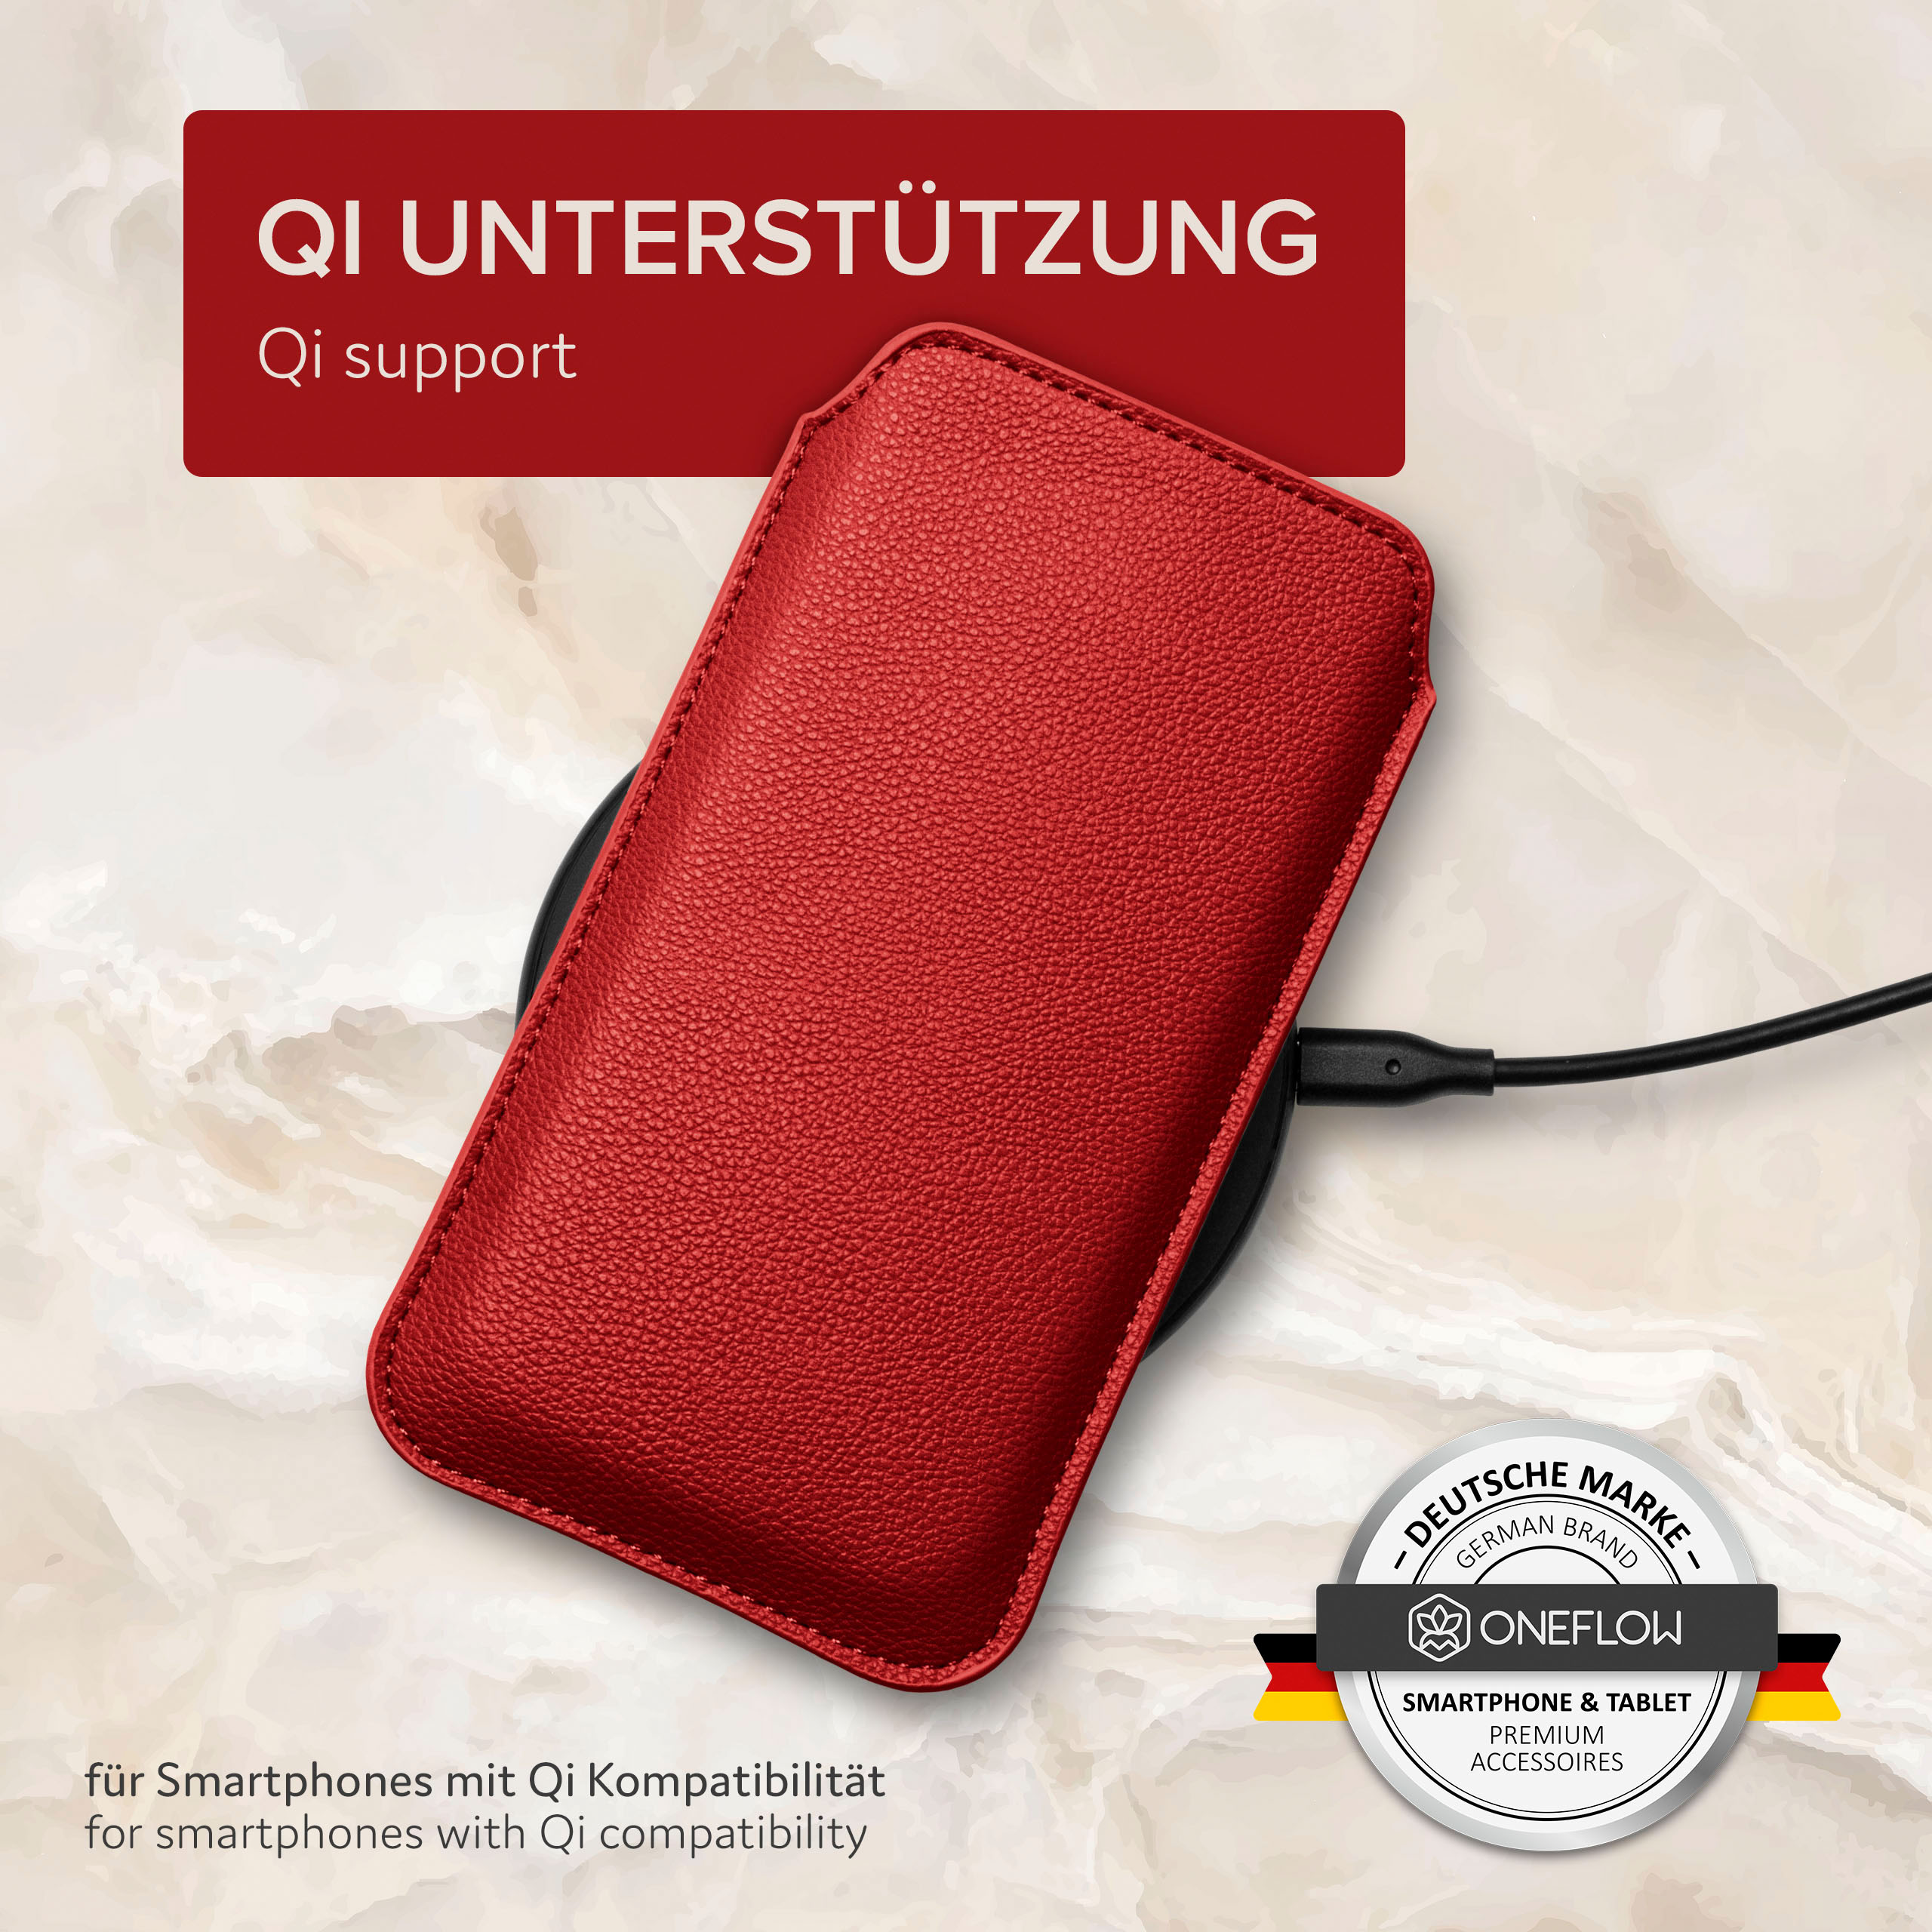 ONEFLOW Einsteckhülle mit Z3 Compact, Cover, Full Sony, Xperia Zuglasche, Dunkelrot